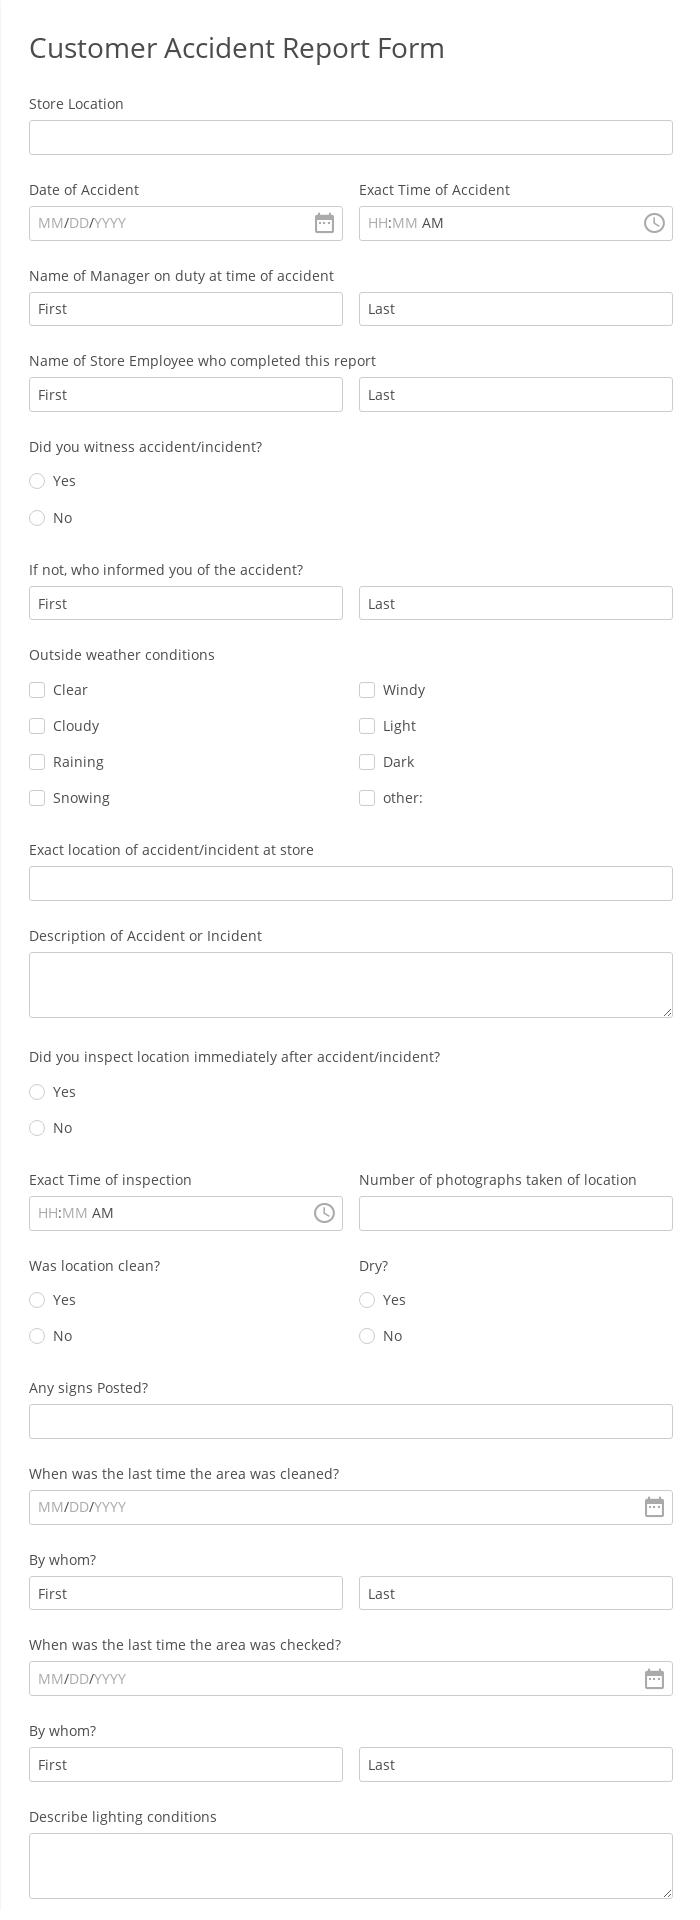 Customer Accident Report Form